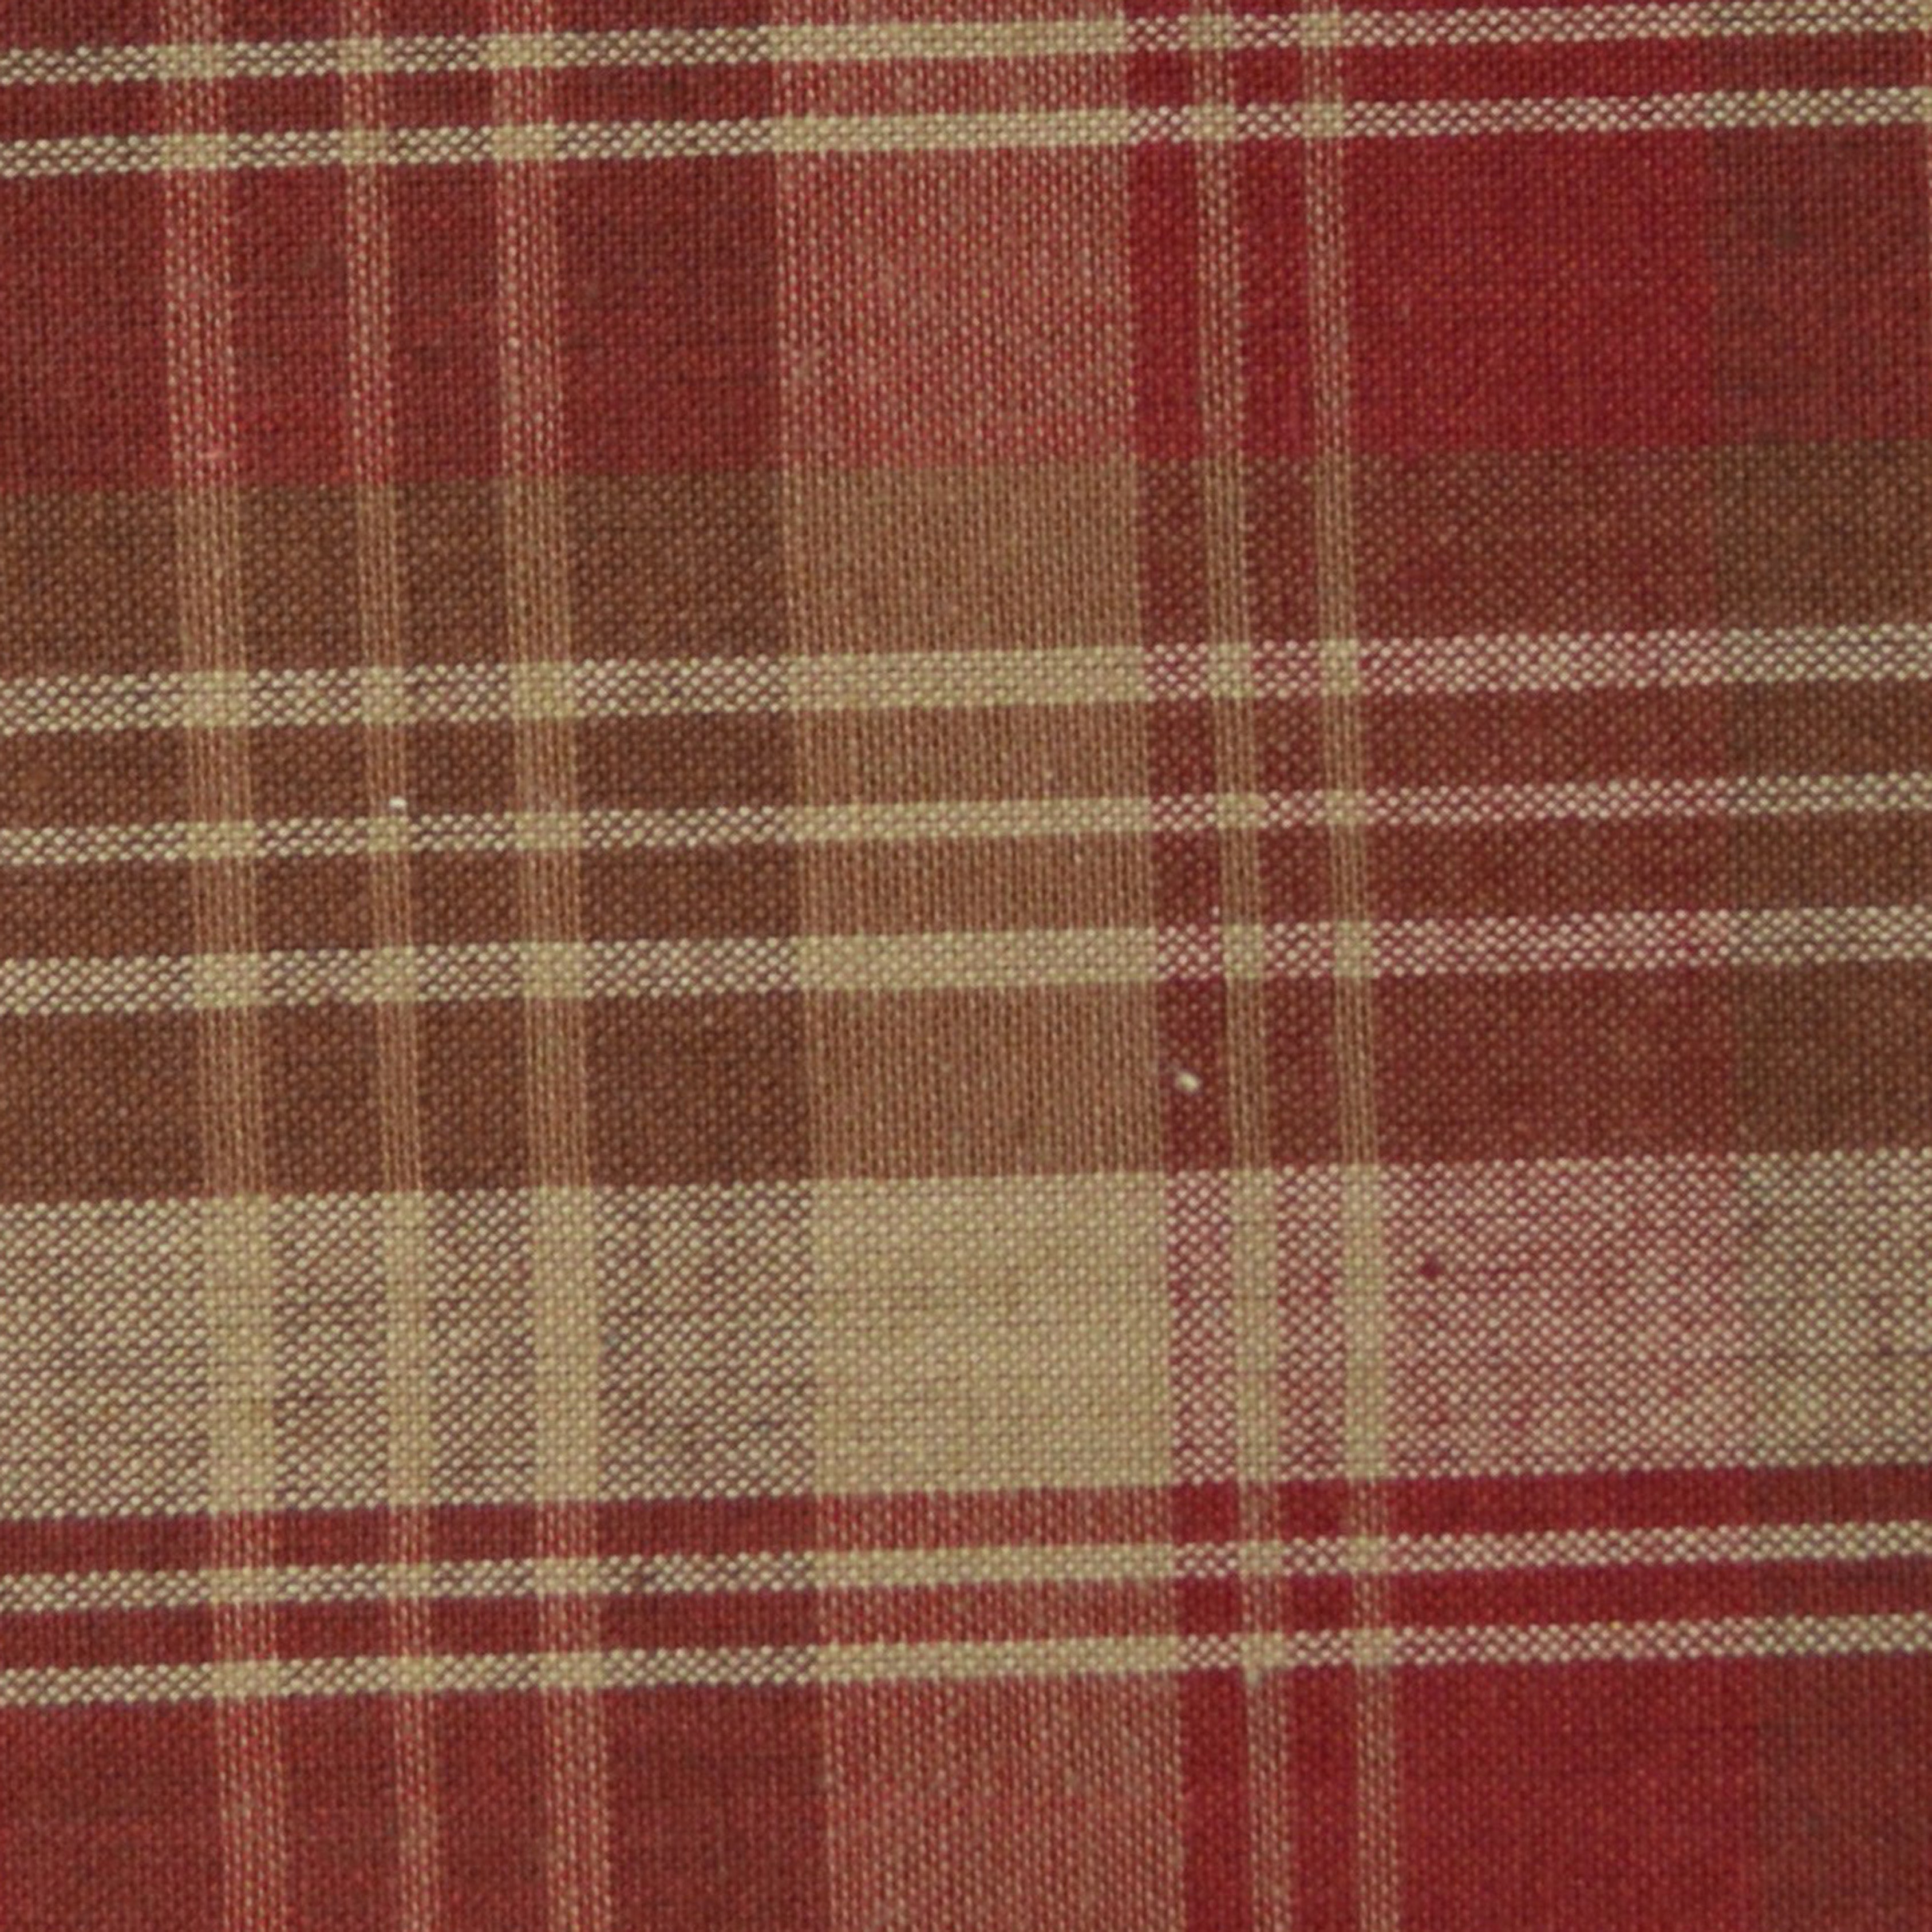 Cotton Homespun Small Plaid Check Sewing Fabric Olive Red Gold Green Taupe  Primitive Check Homespun Fabric Rustic Country Cabin Fabric 